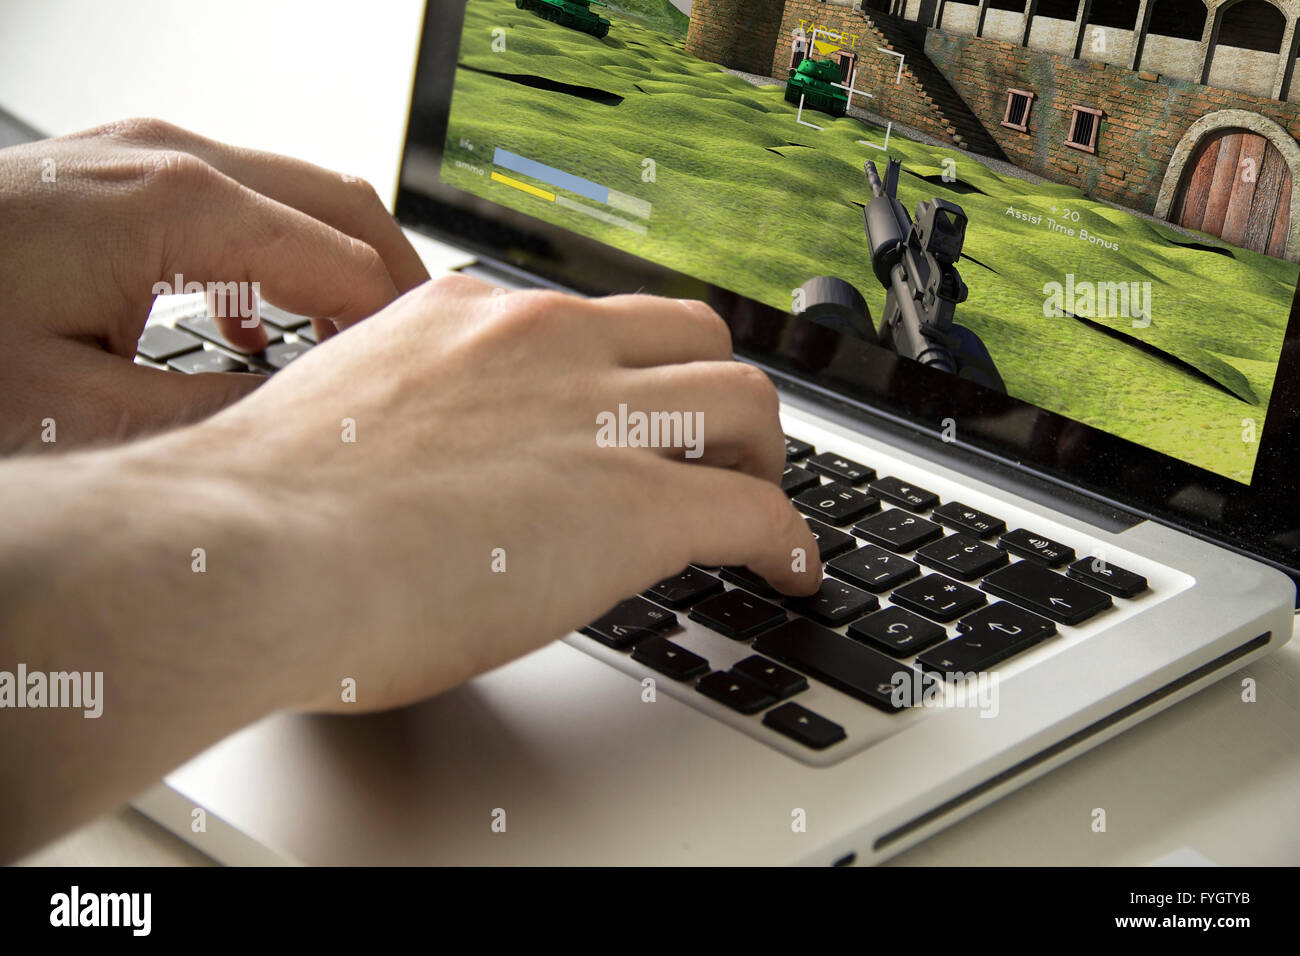 leisure or dependence concept: Man playing a computer game Stock Photo